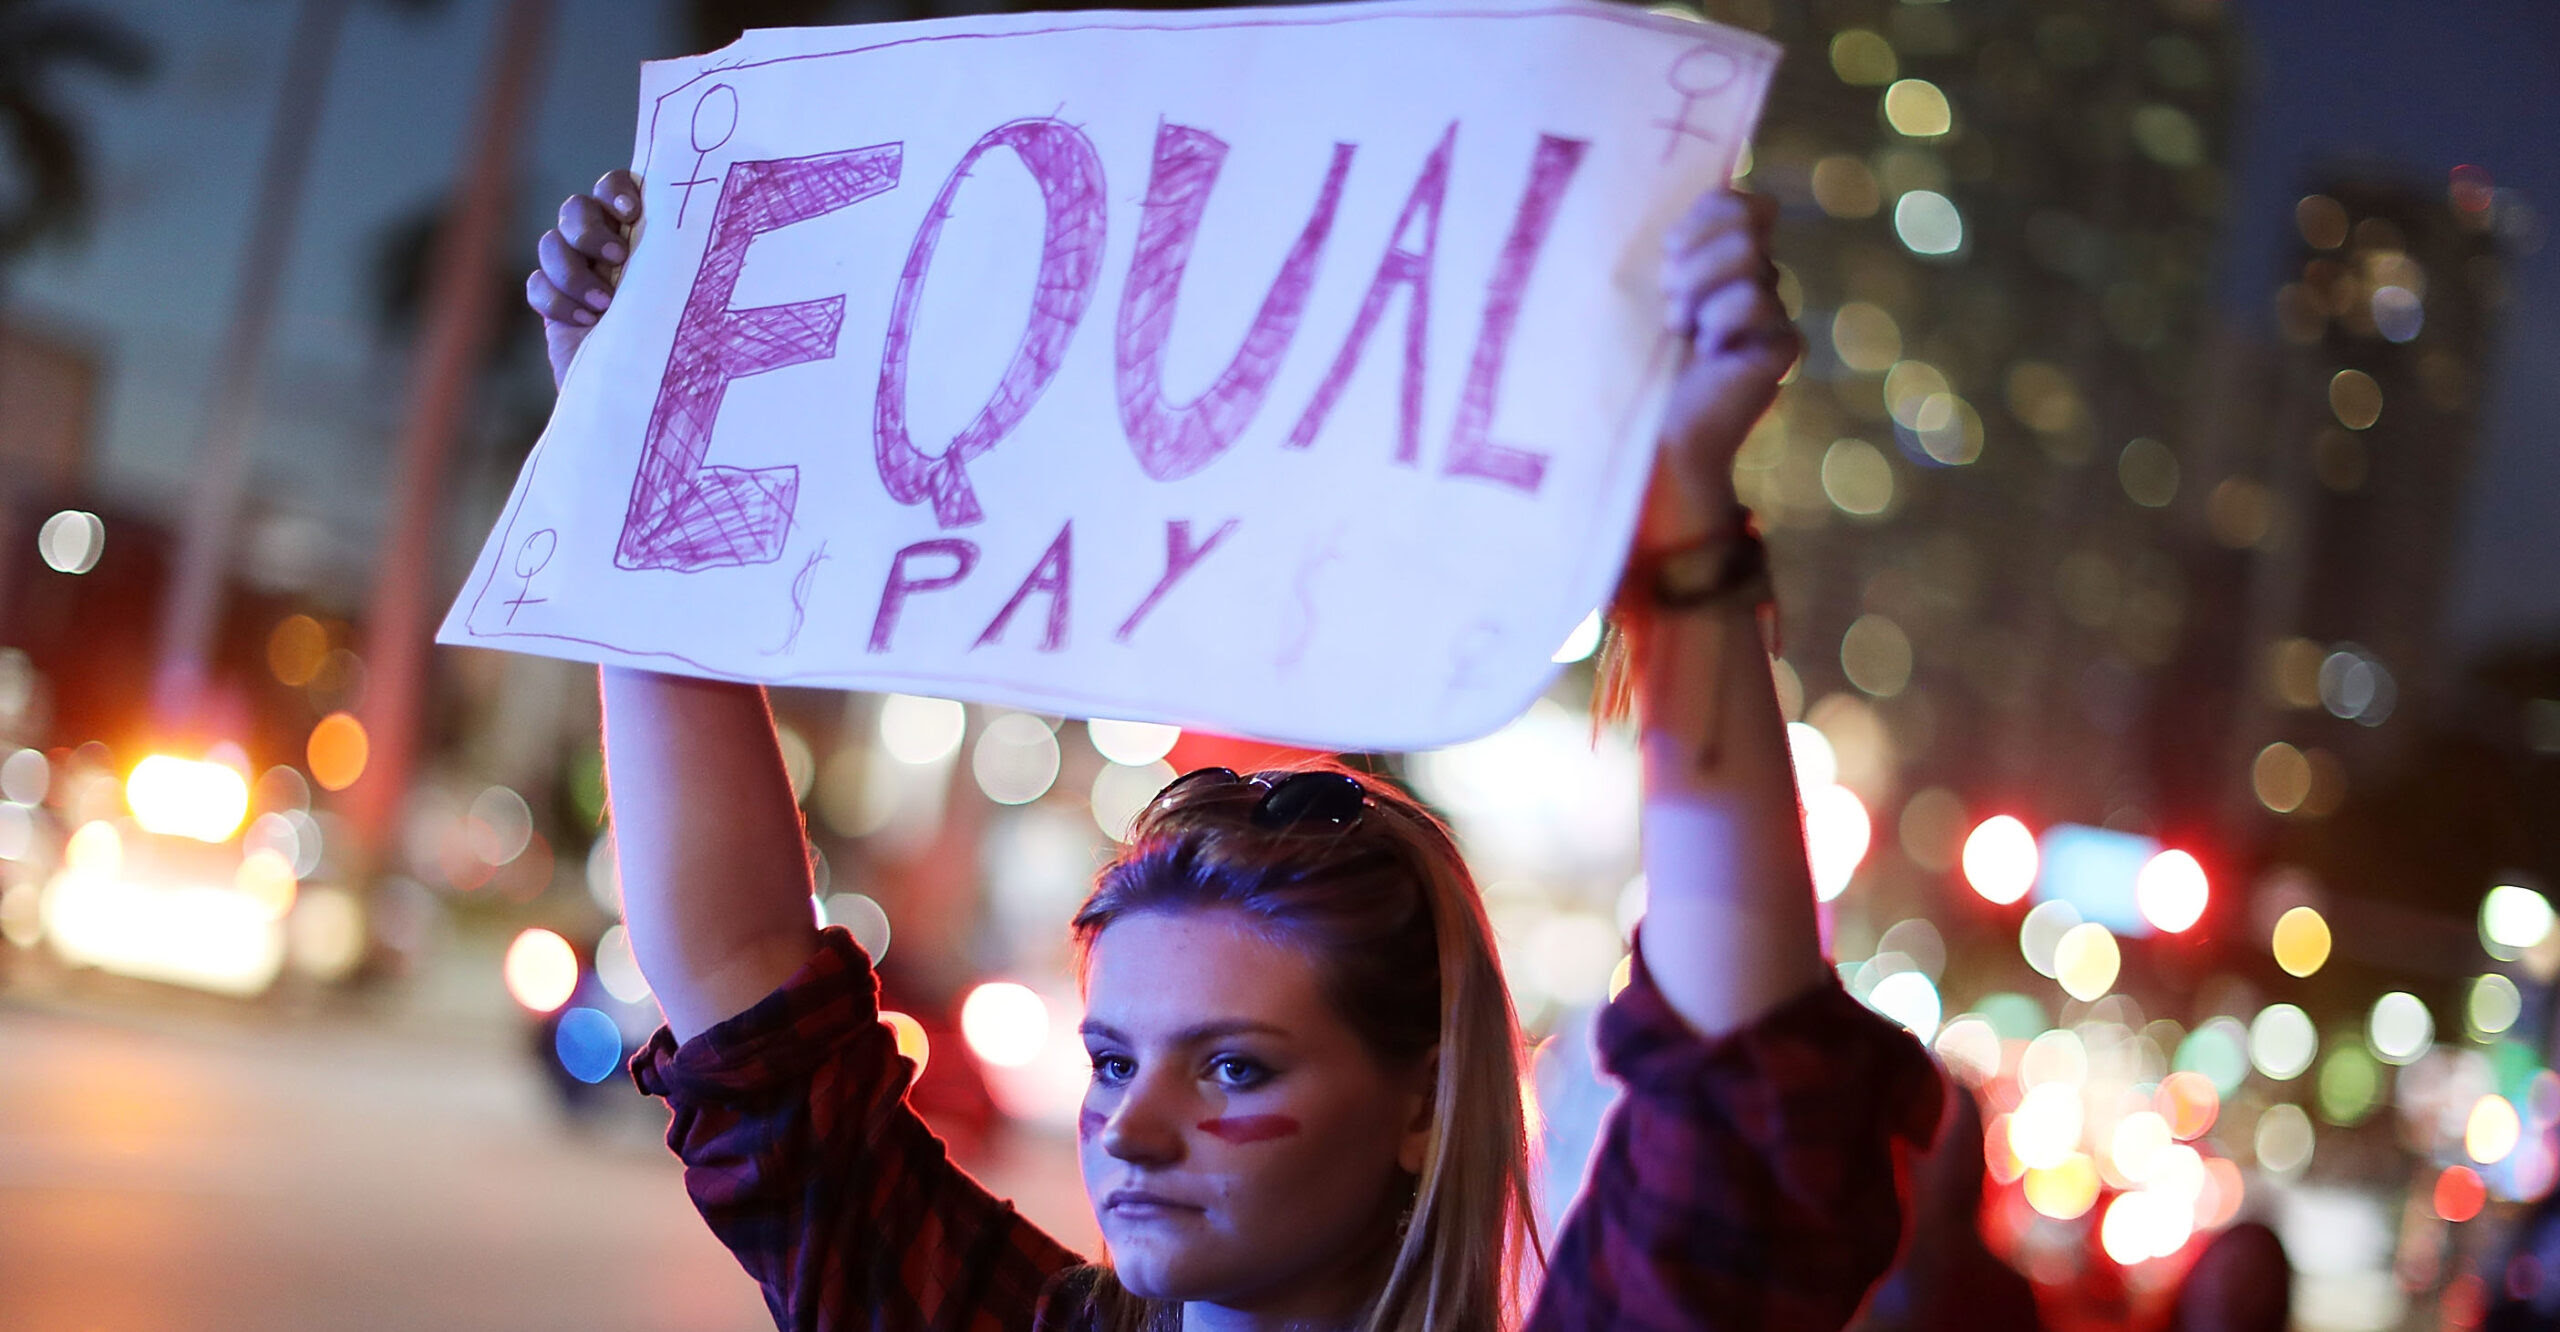 How ‘Equal Pay Day’ Compares Apples and Oranges